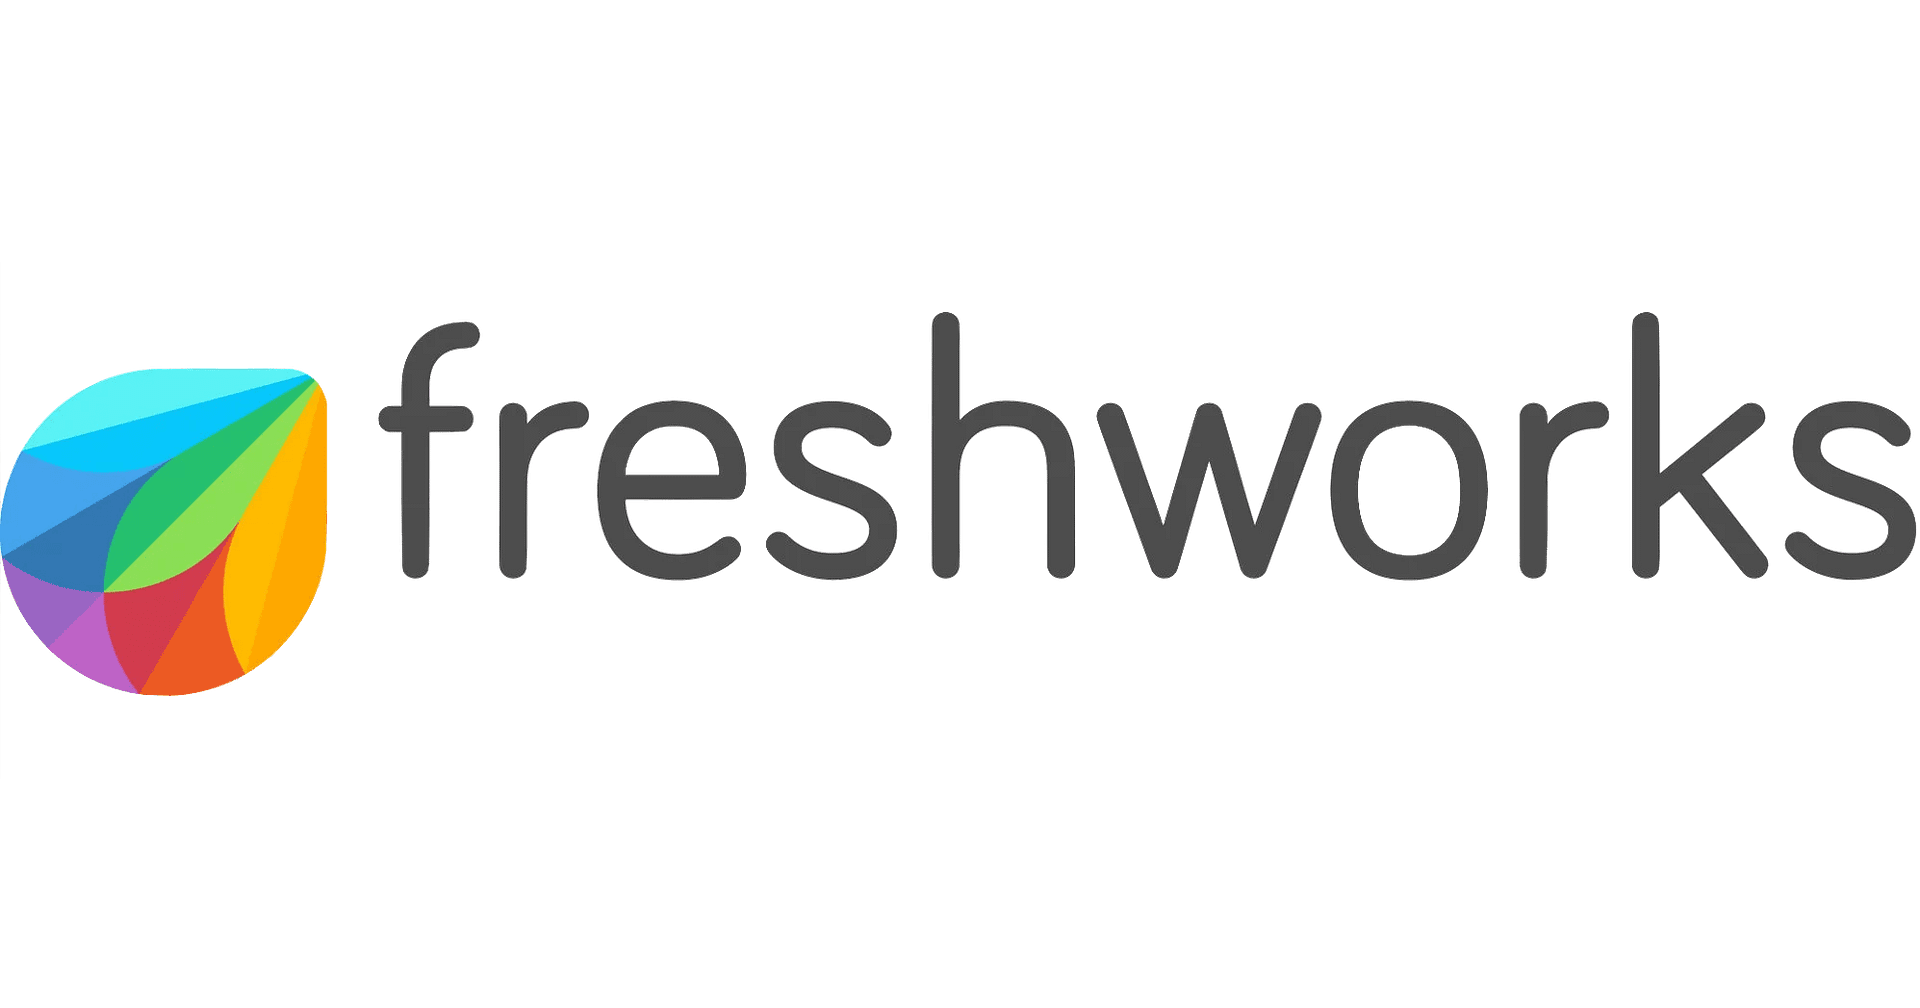 Freshworks makes it fast and easy for businesses to delight their customers and employees. We take a fresh approach to how businesses discover, engage with, and realize value from software throughout their journey.